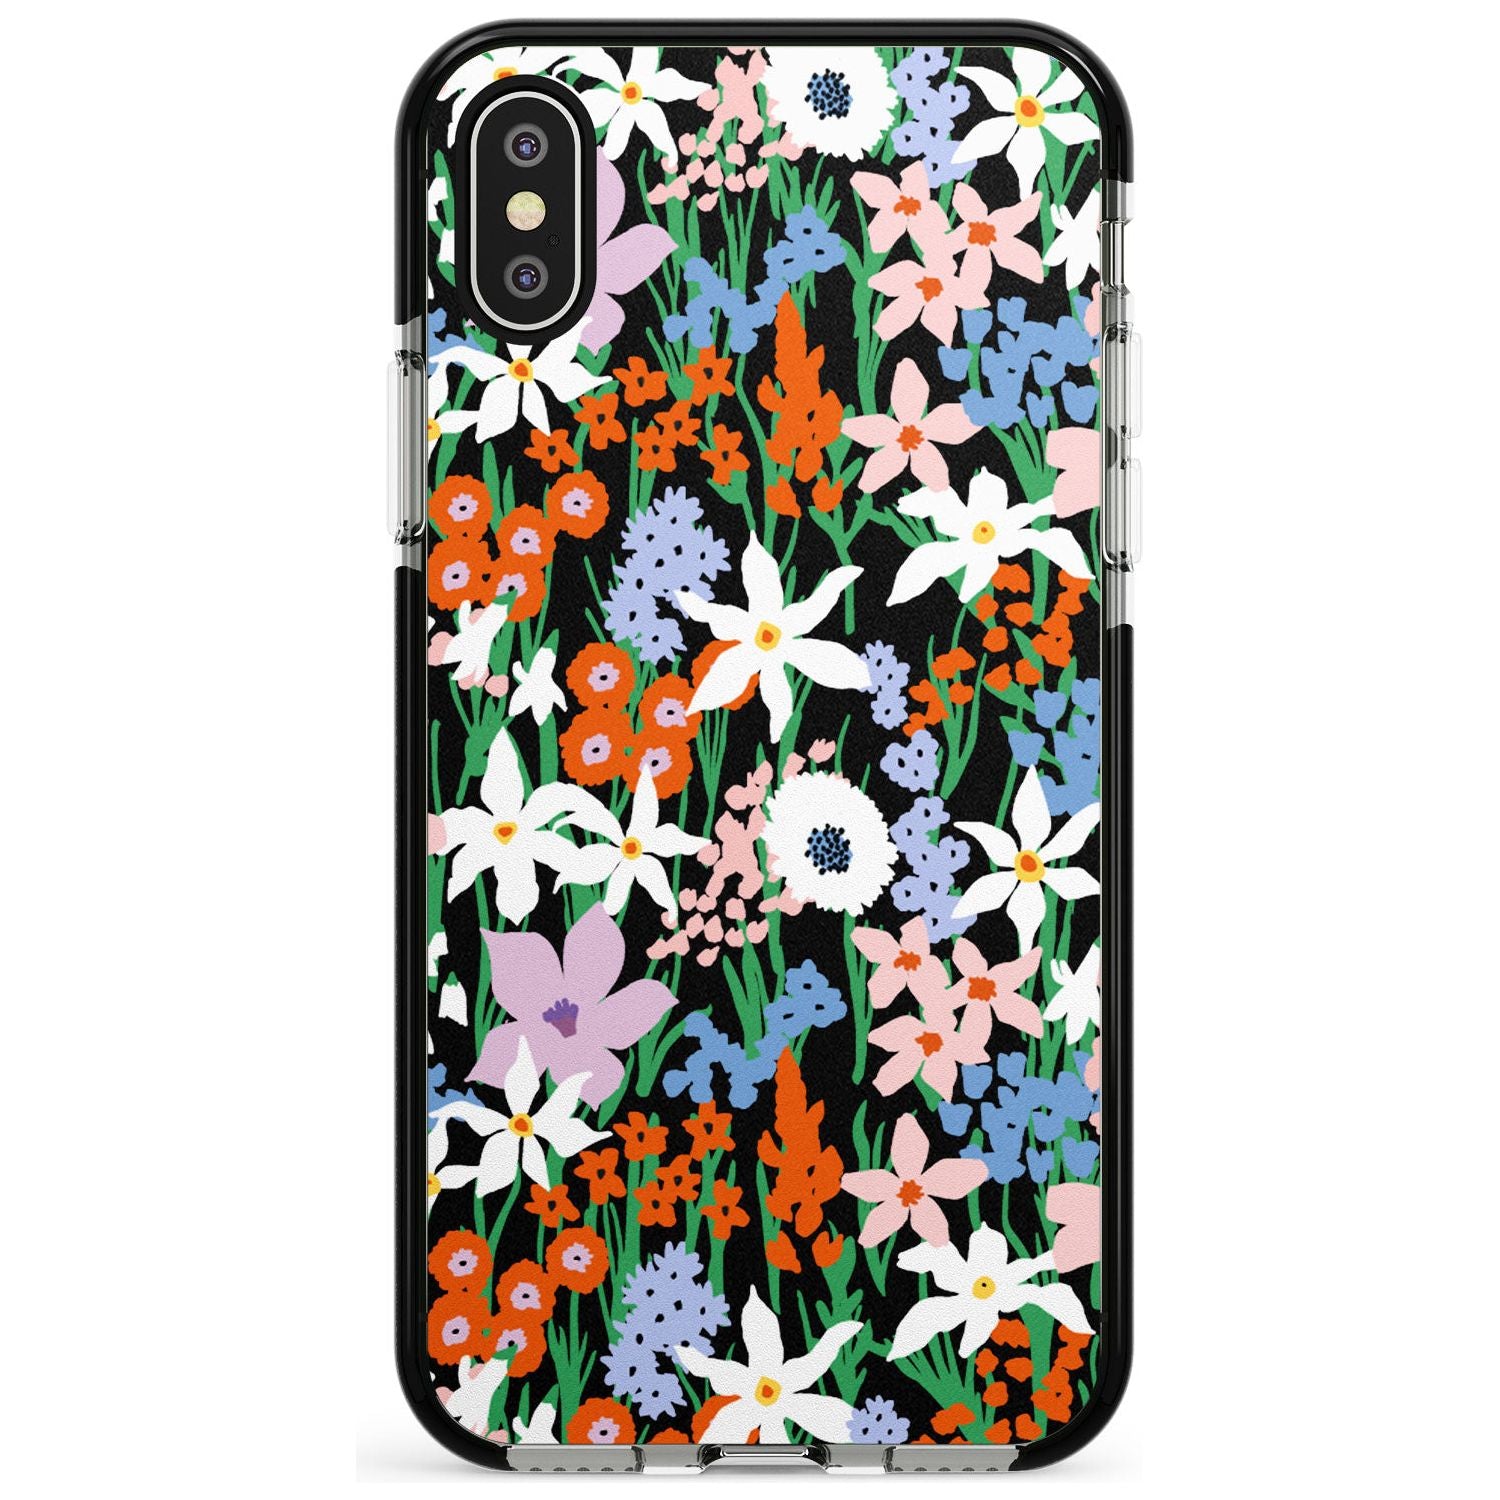 Springtime Meadow: Solid Pink Fade Impact Phone Case for iPhone X XS Max XR